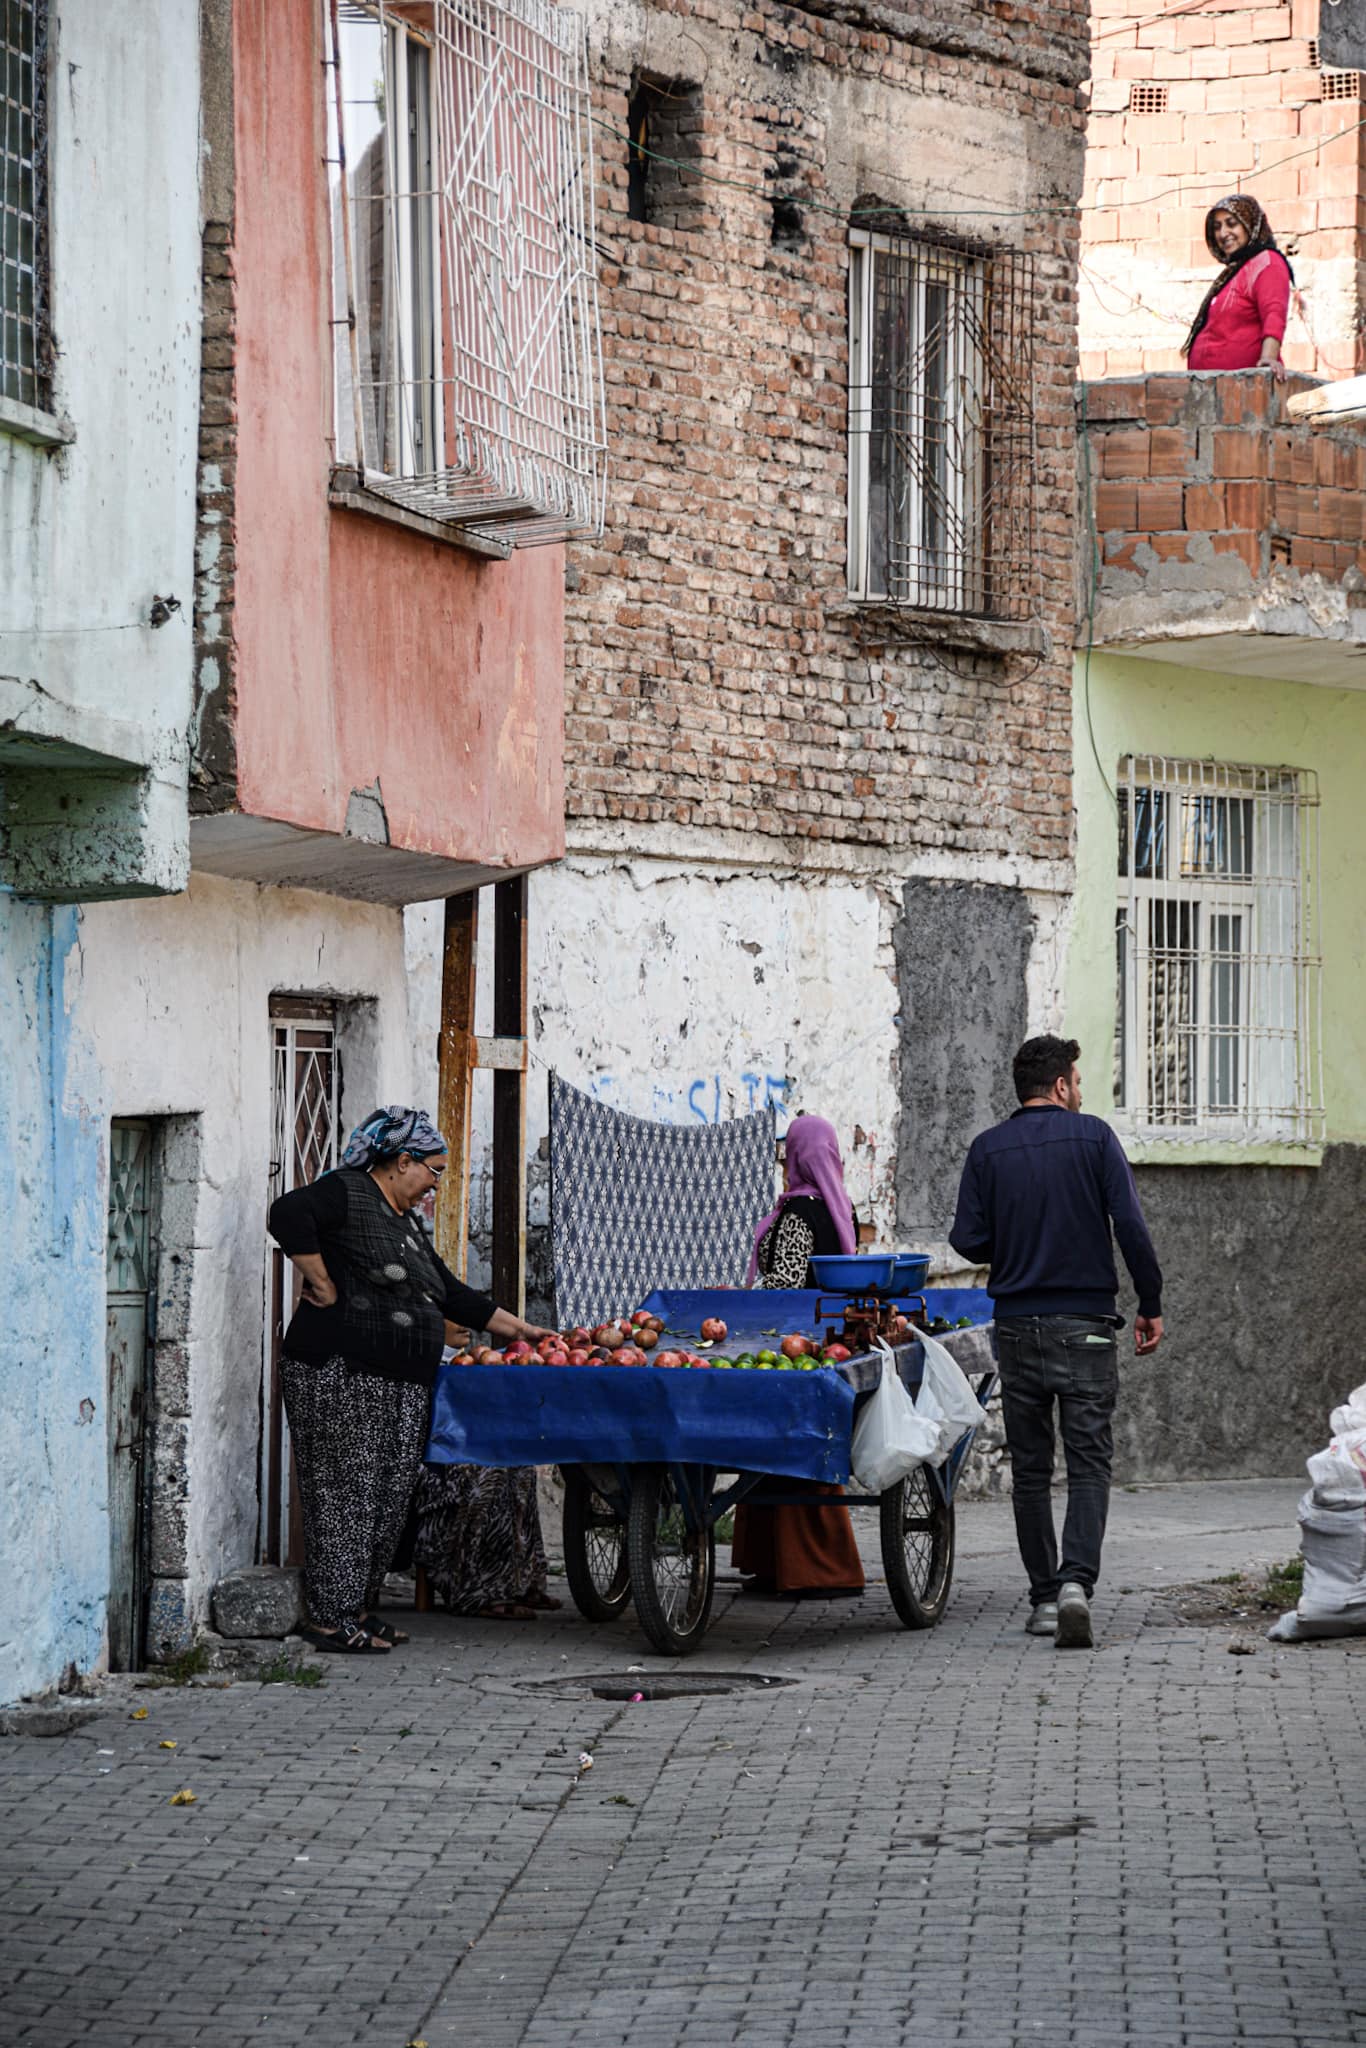 a man selling fruits from a blue cart in a sidealley in Diyarbakir old town